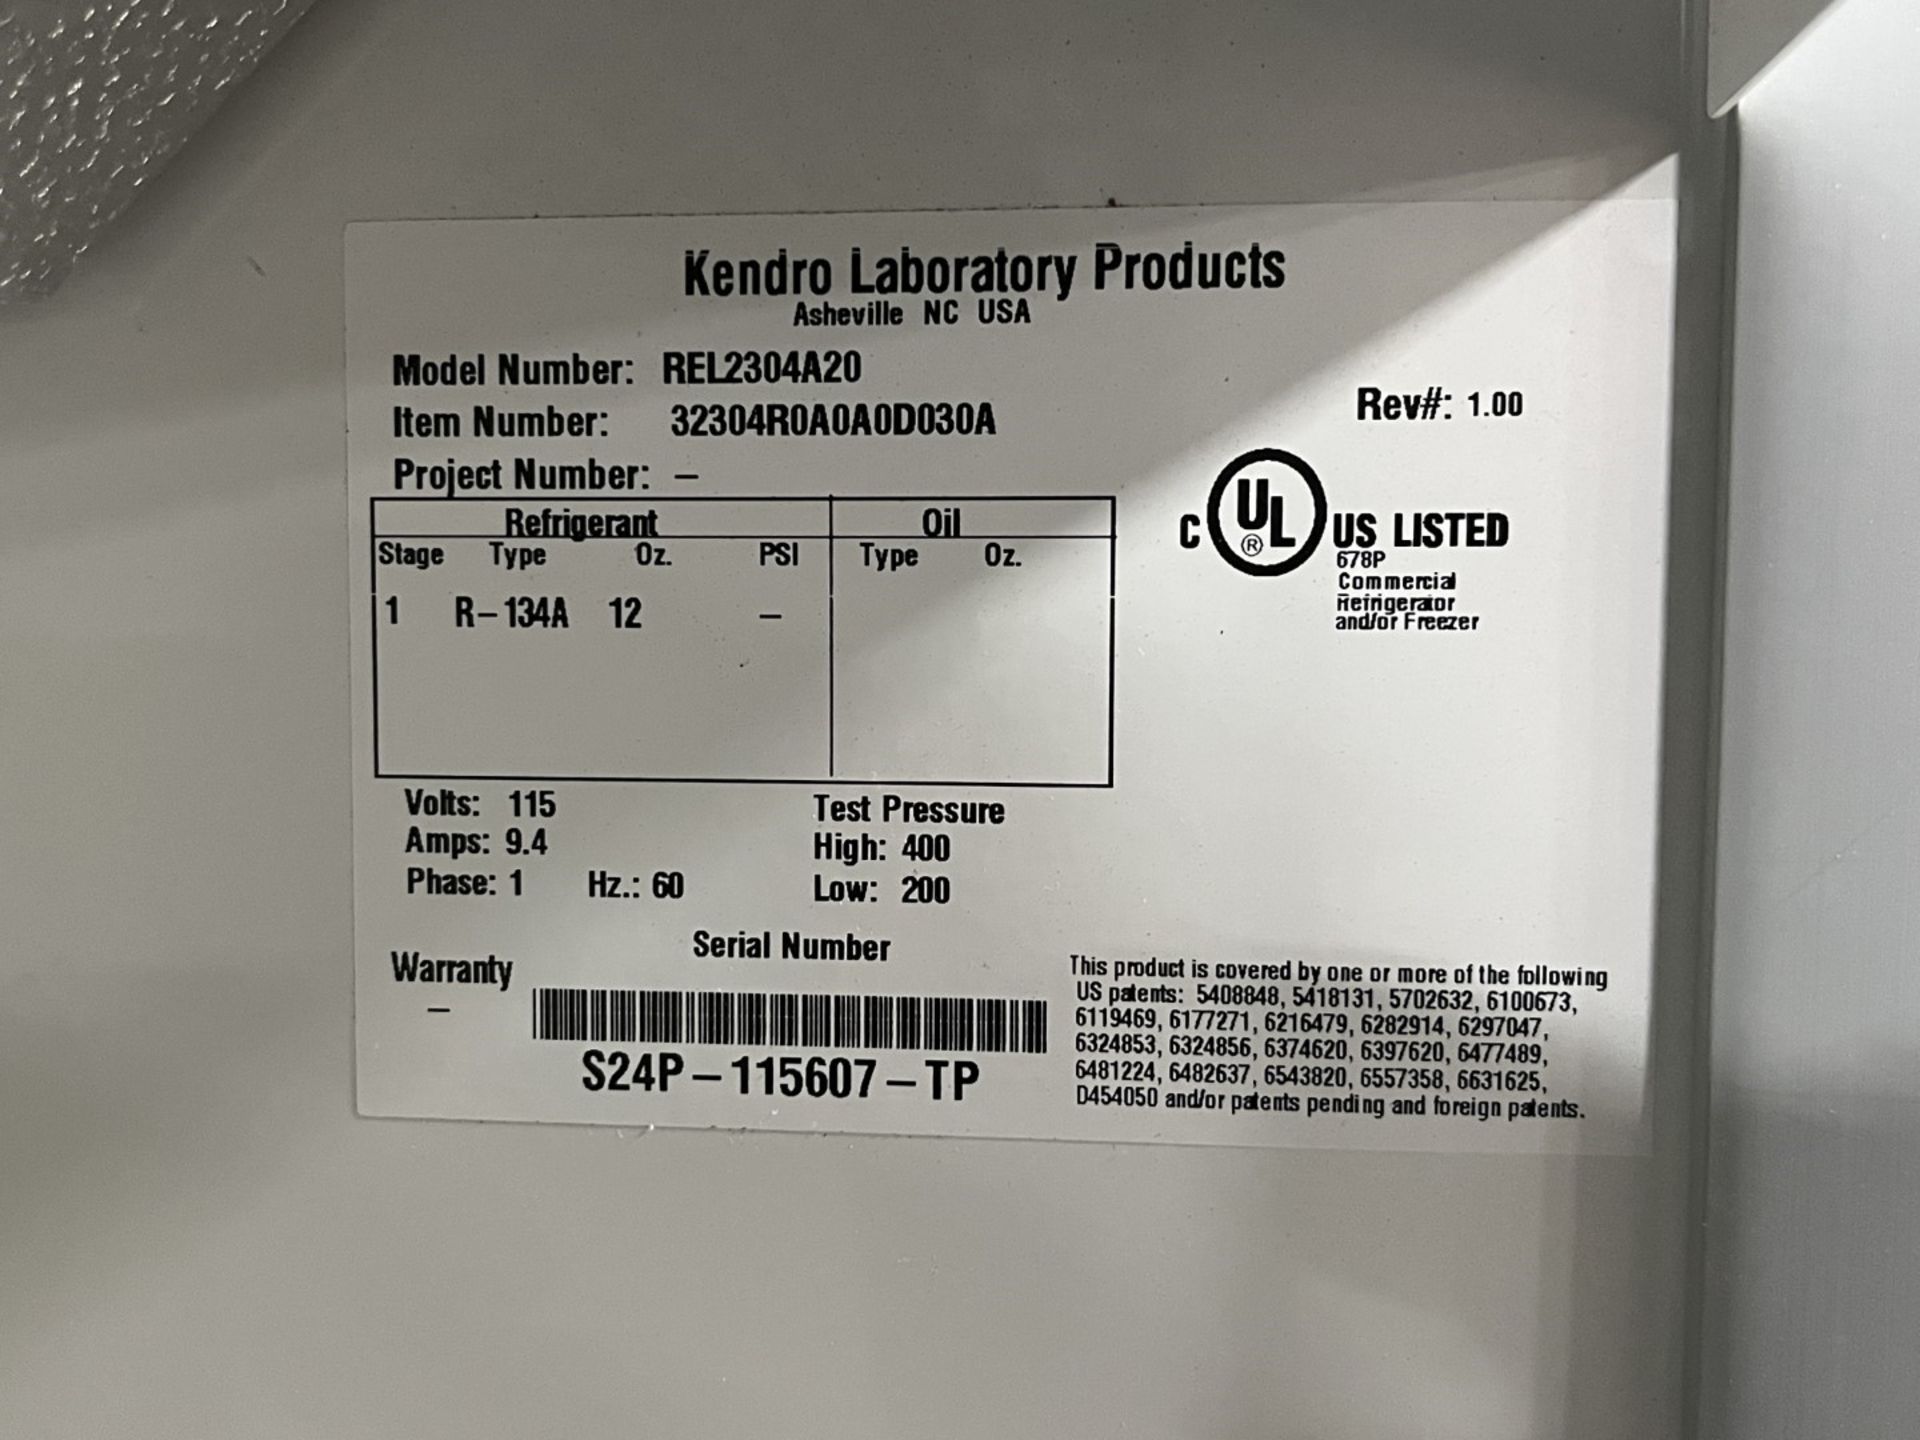 Kendro Laboratory Products, Model REL2304A20, 115 volt, R-134a refrigerant, serial# S24P-115607- - Image 2 of 7